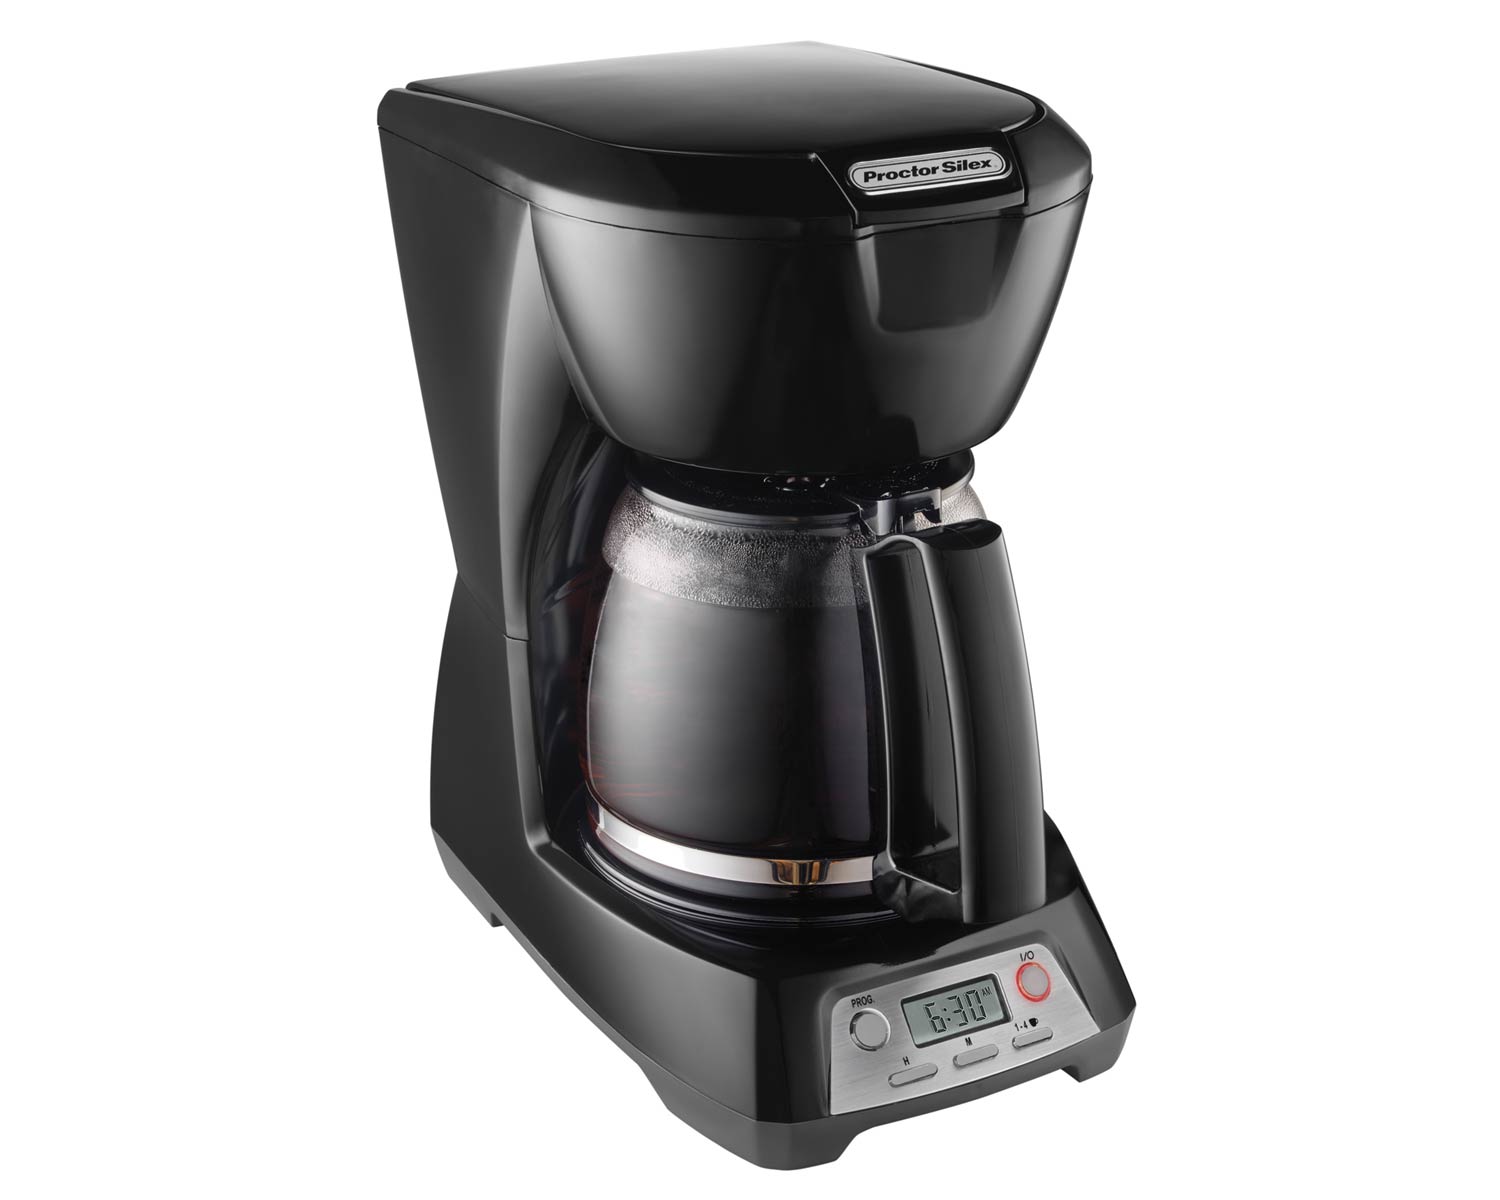 Programmable 12 Cup Coffee Maker - Black 